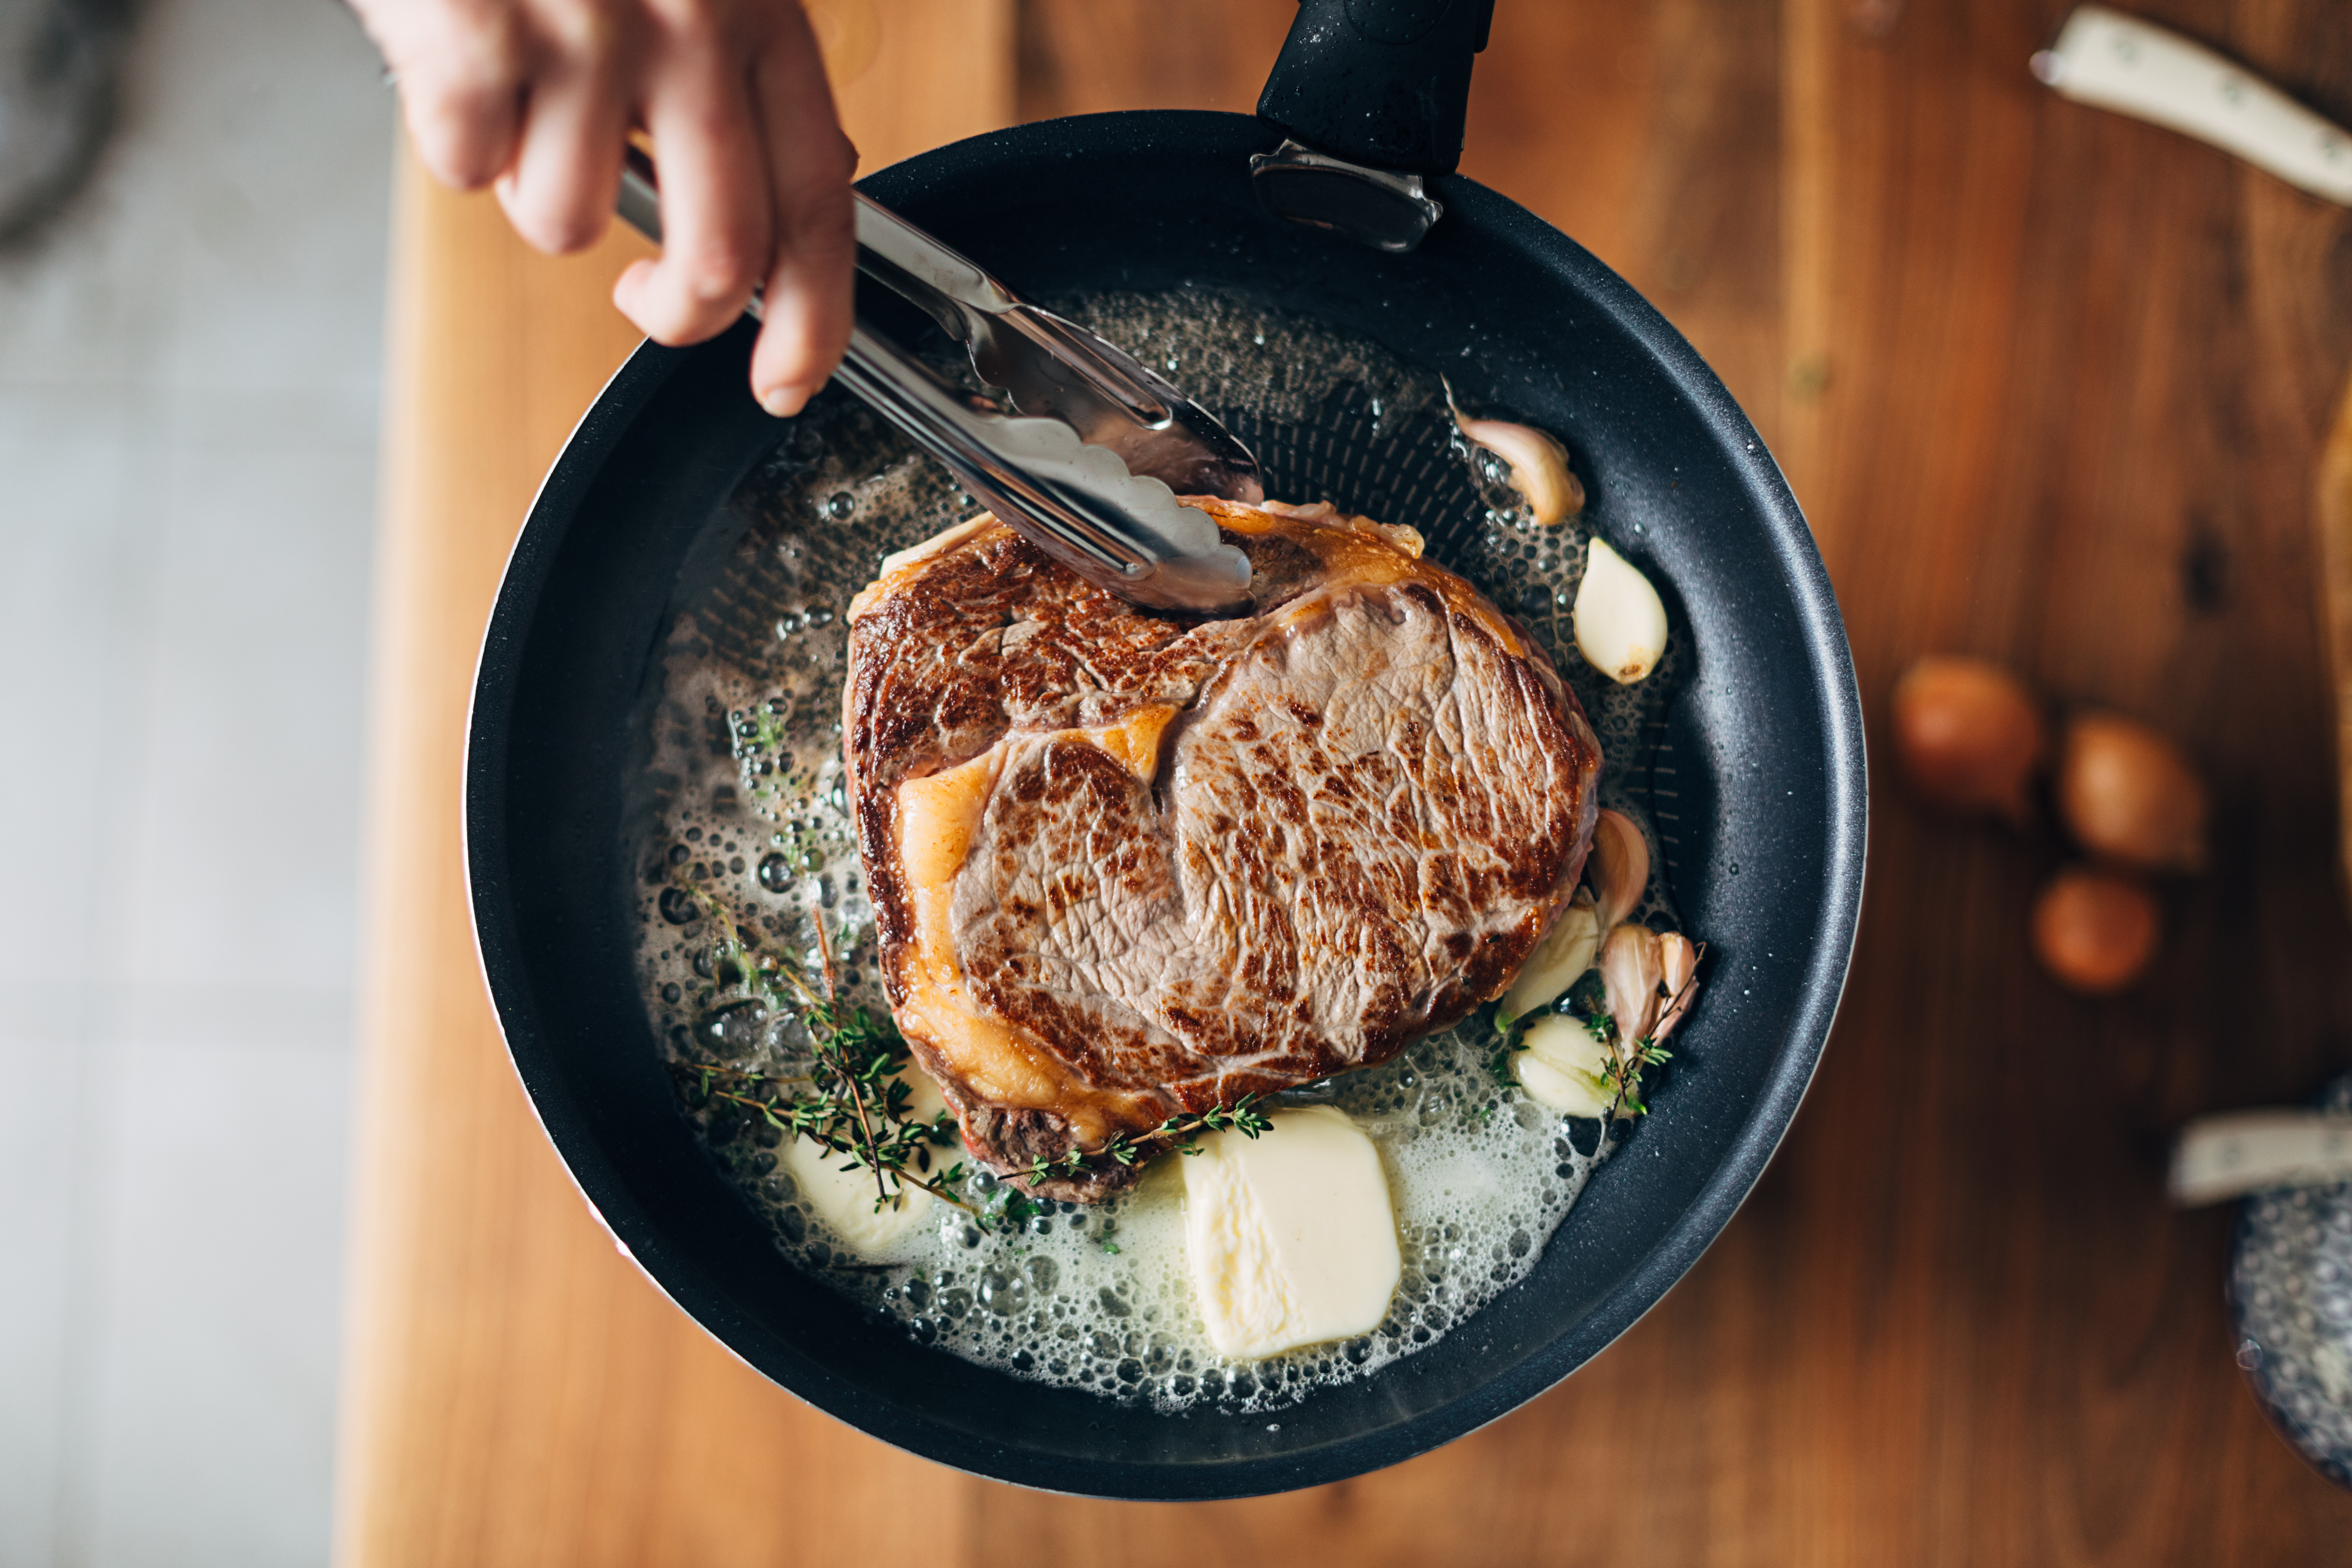 chef searing steak with butter and thyme